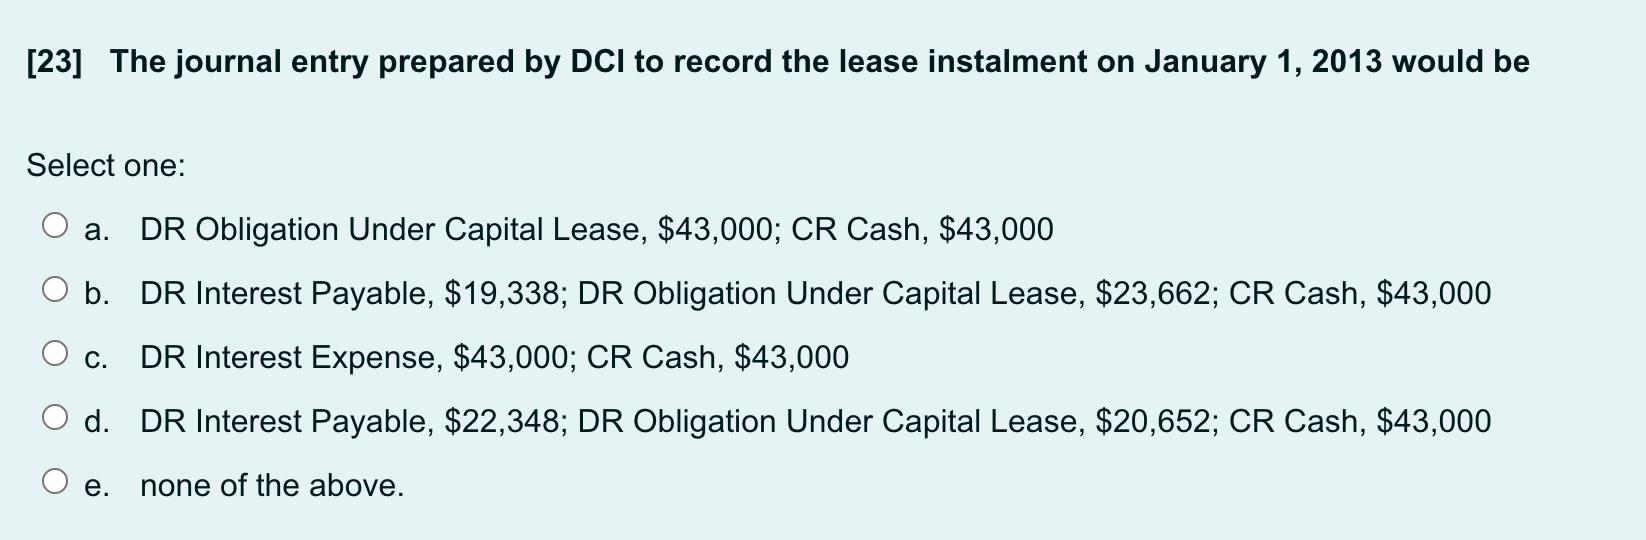 [23] The journal entry prepared by DCI to record the lease instalment on January 1, 2013 would be Select one: a. DR Obligatio